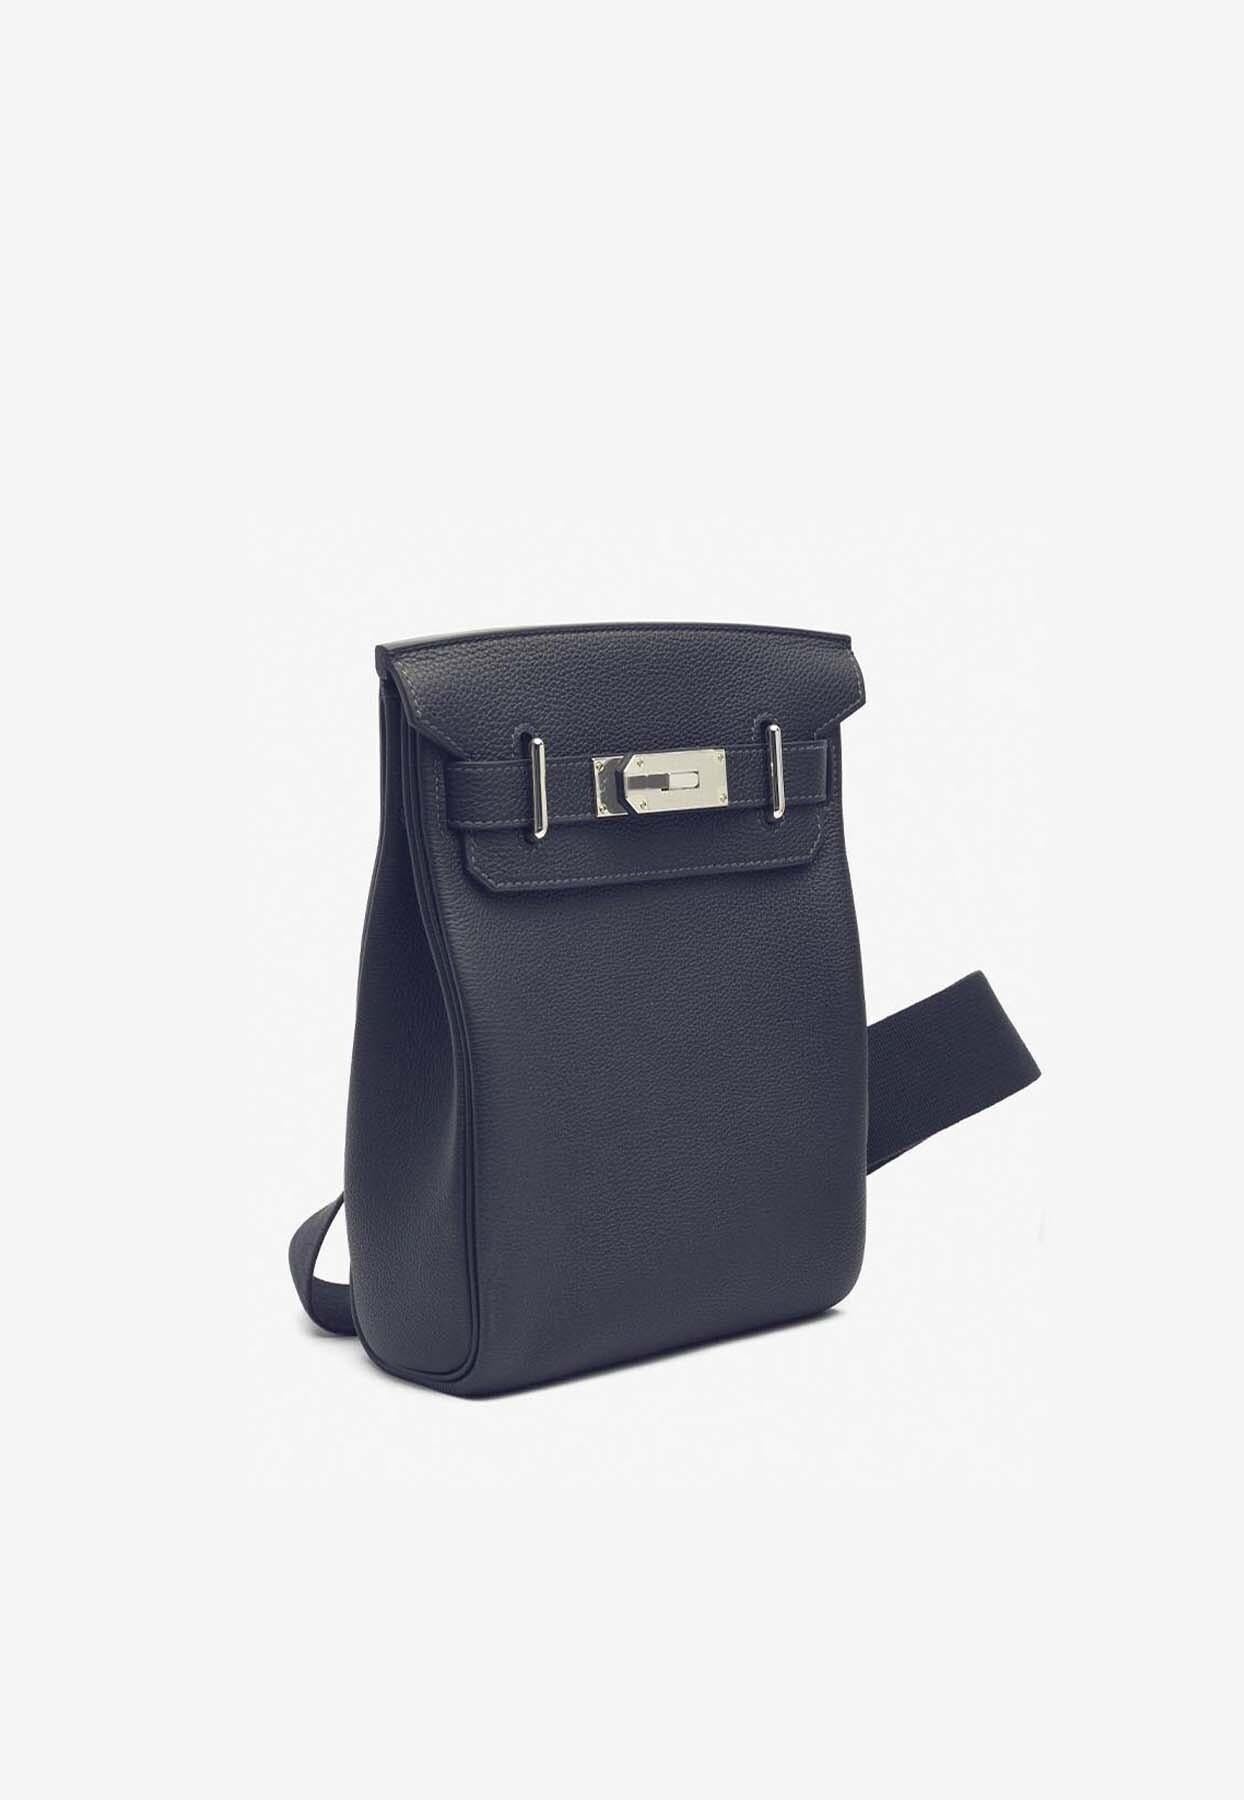 Material: 100% Togo calfskin
D-ring buckle
Palladium hardware
Stamped logo
Adjustable shoulder strap
One main compartment
Made in France
Comes in a signature Hermès box and with a dust bag, lock and keys